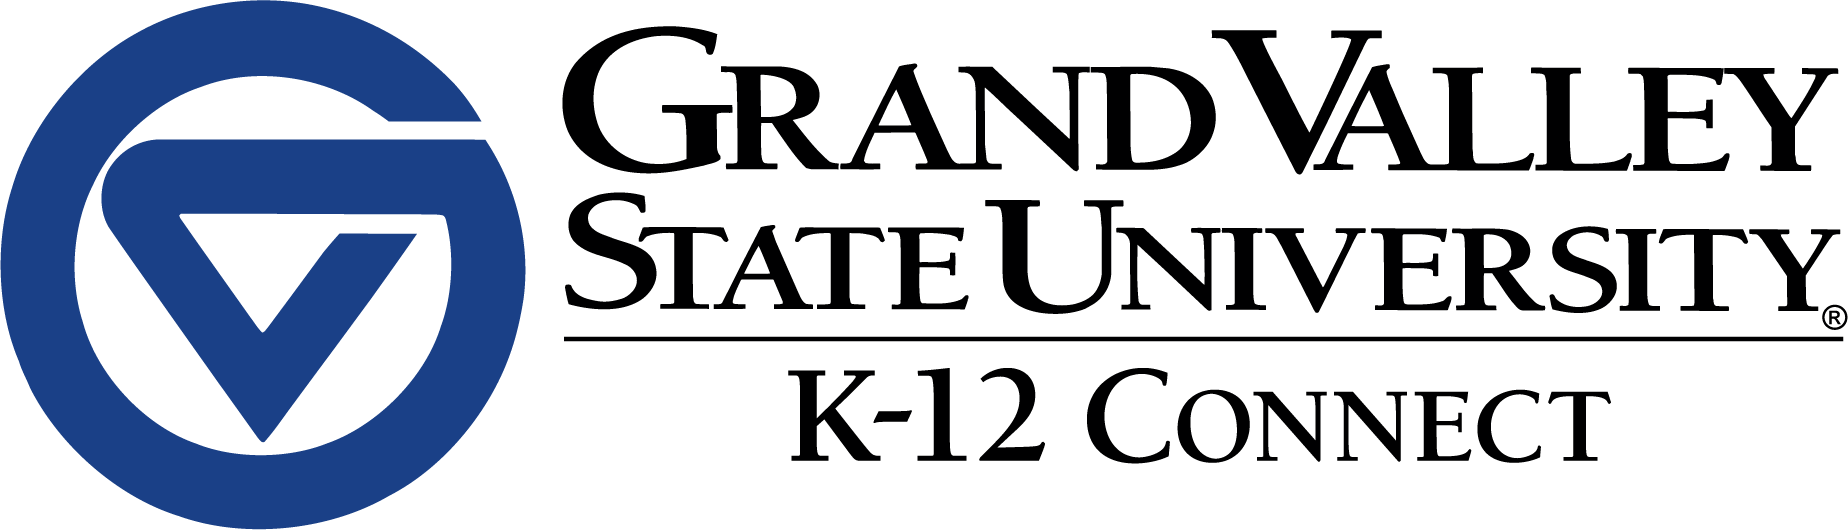 Grand Valley State University K-12 Connect home